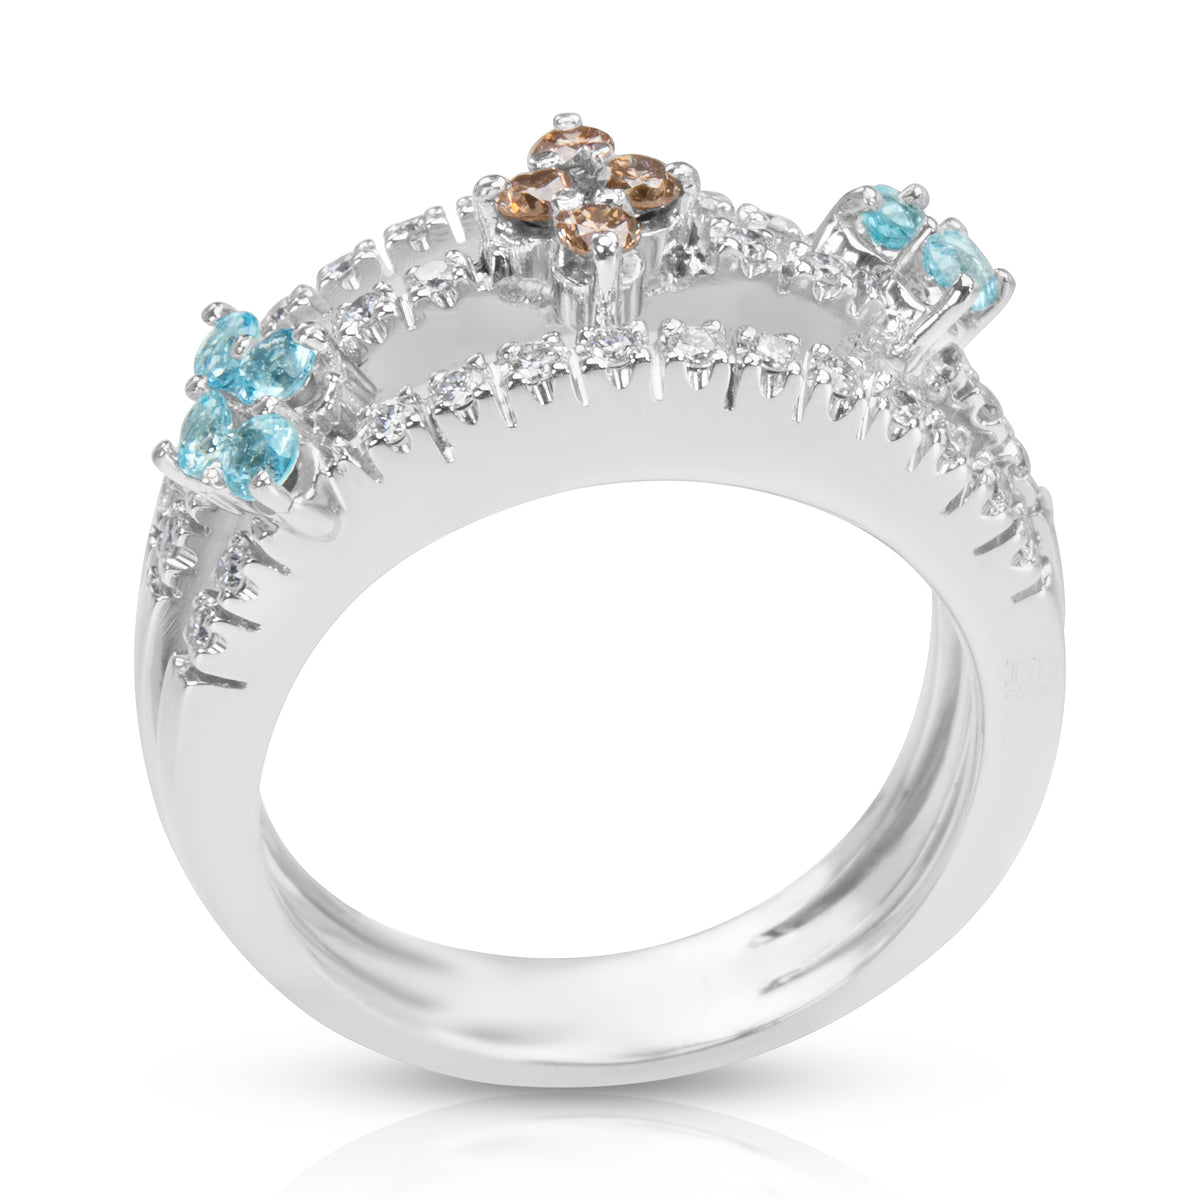 Blue Topaz and Diamond Ring in 18K White Gold (0.42 CTW)